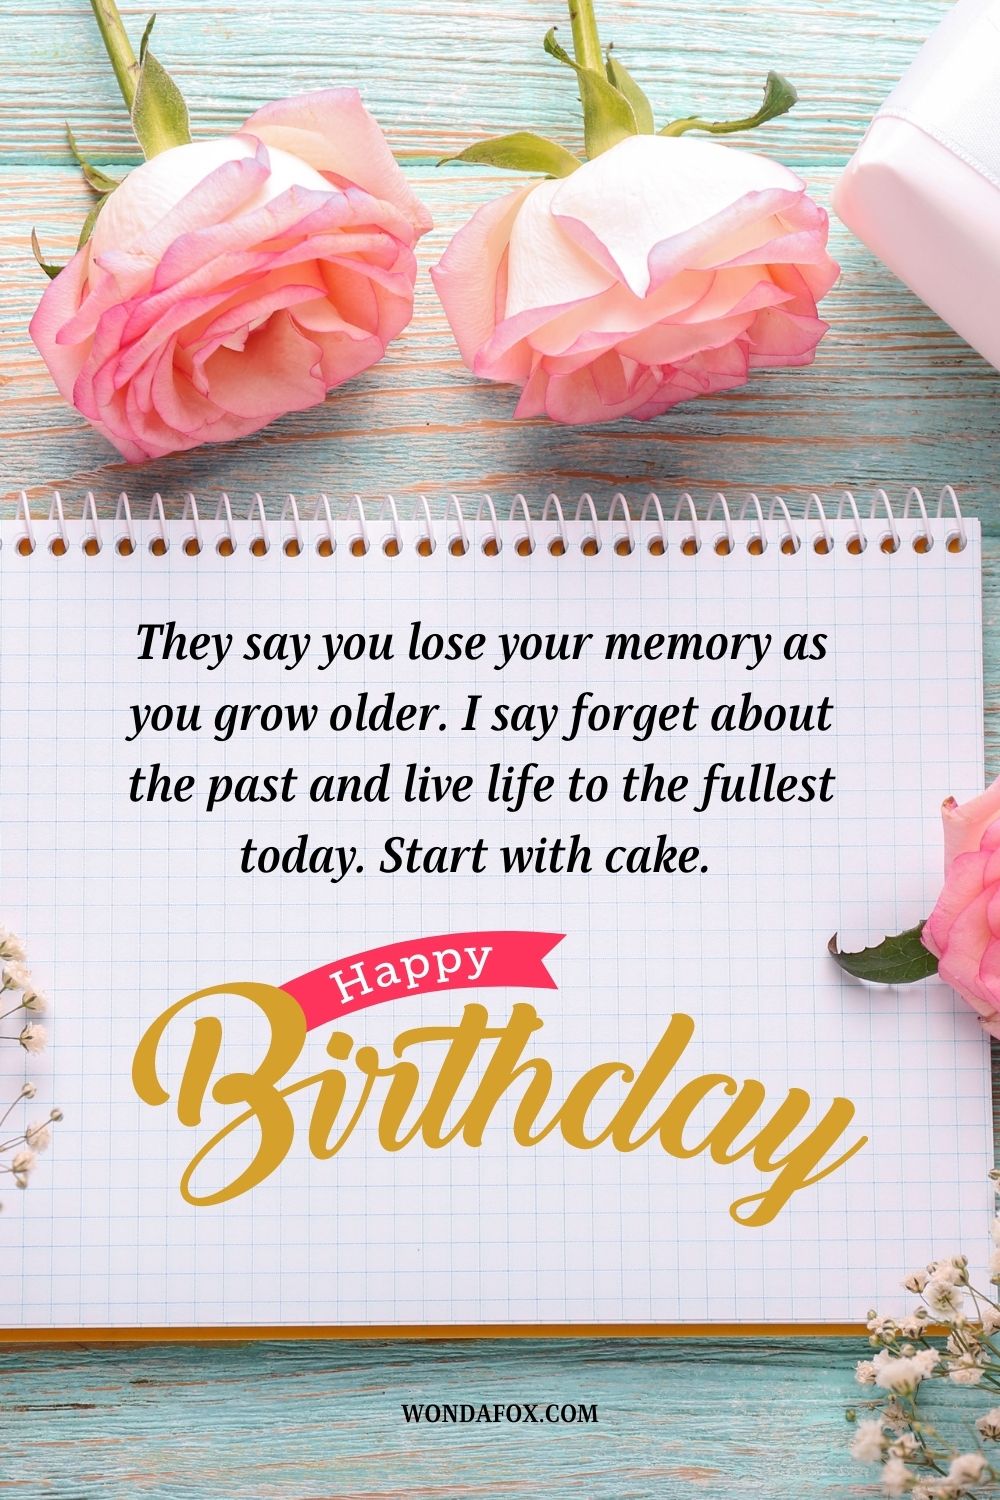 They say you lose your memory as you grow older. I say forget about the past and live life to the fullest today. Start with cake. Happy birthday.